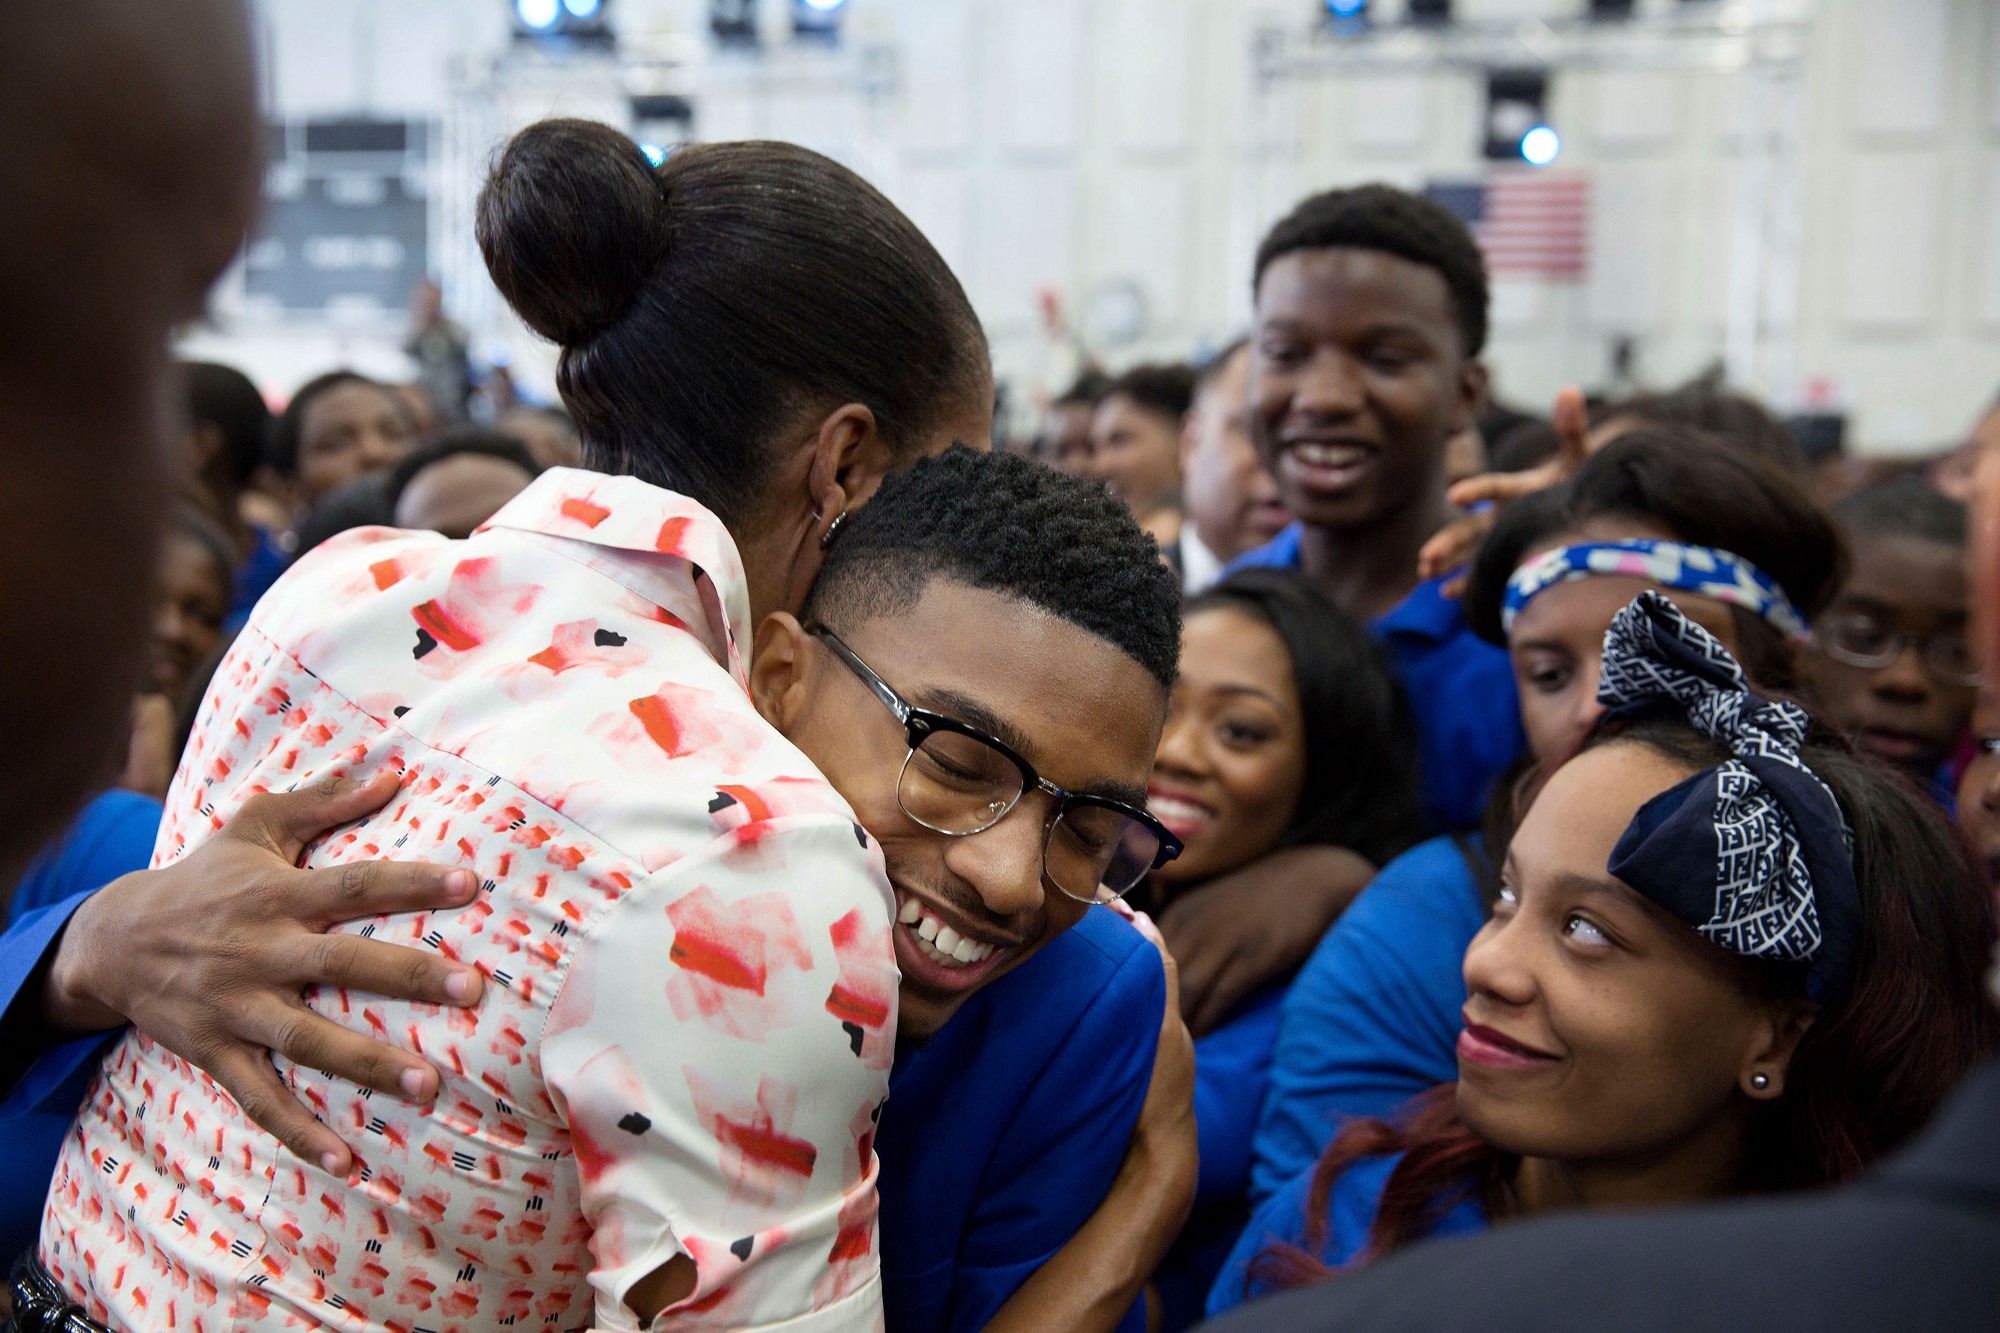 Sept. 8, 2014. Greeting students at Booker T. Washington High School in Atlanta, Ga. (Official White House Photo by Chuck Kennedy)